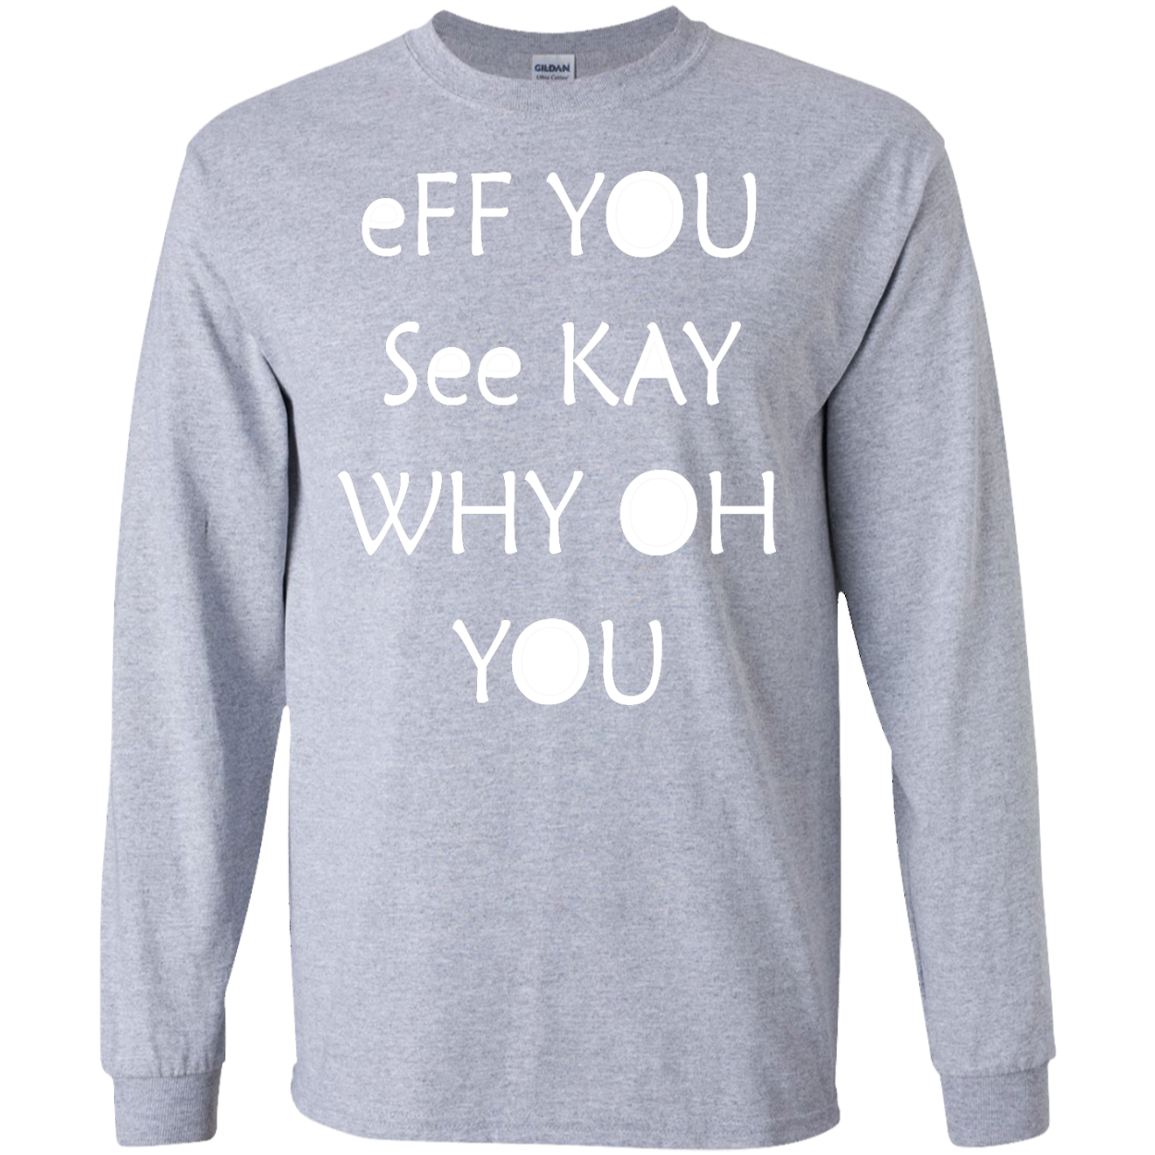 Eff you see kay why oh you shirt, tank, racerback